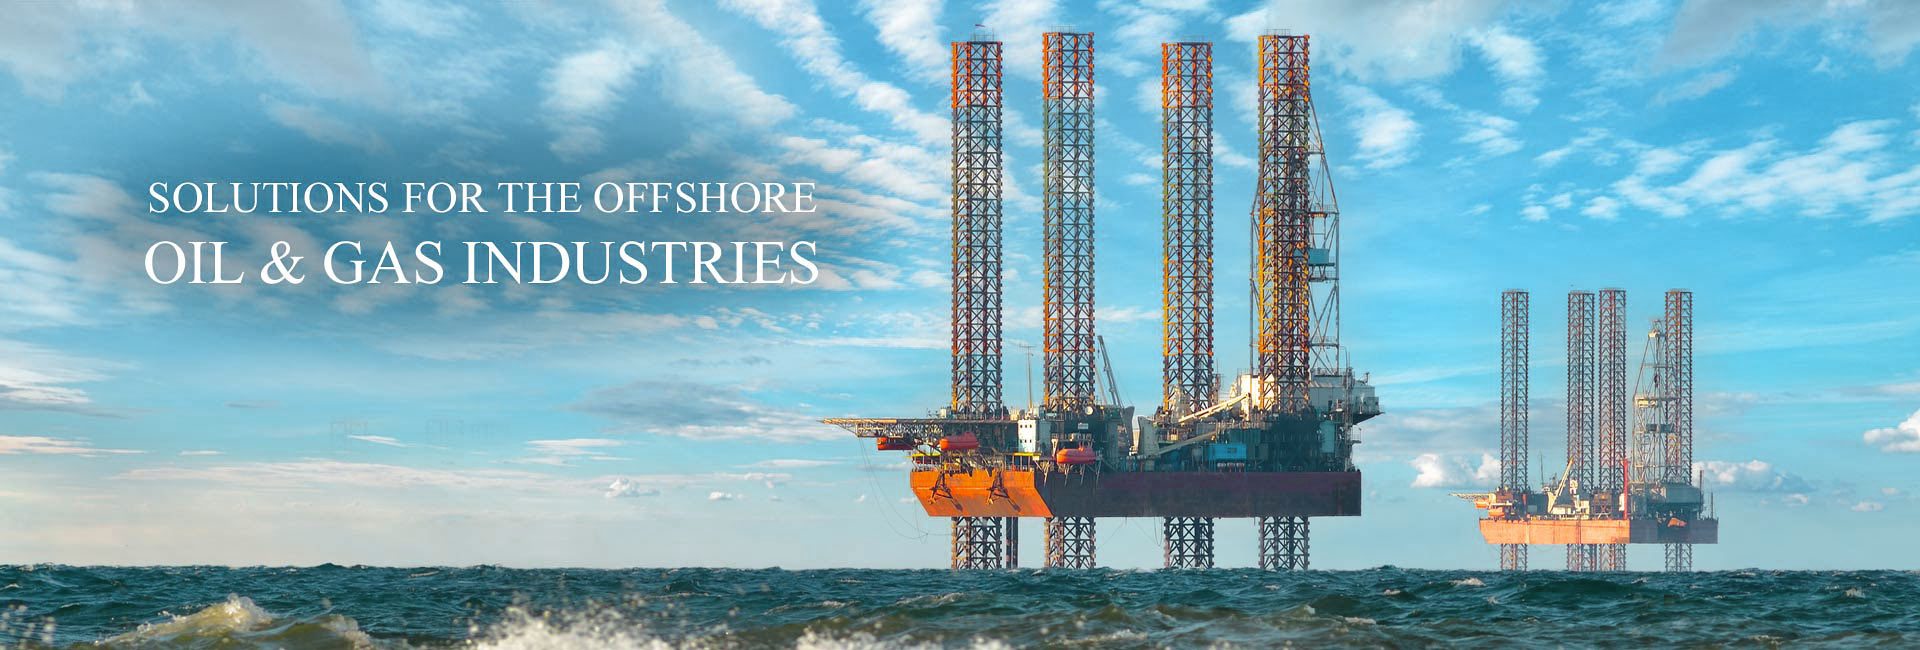 offshore oil & gas staffing & training